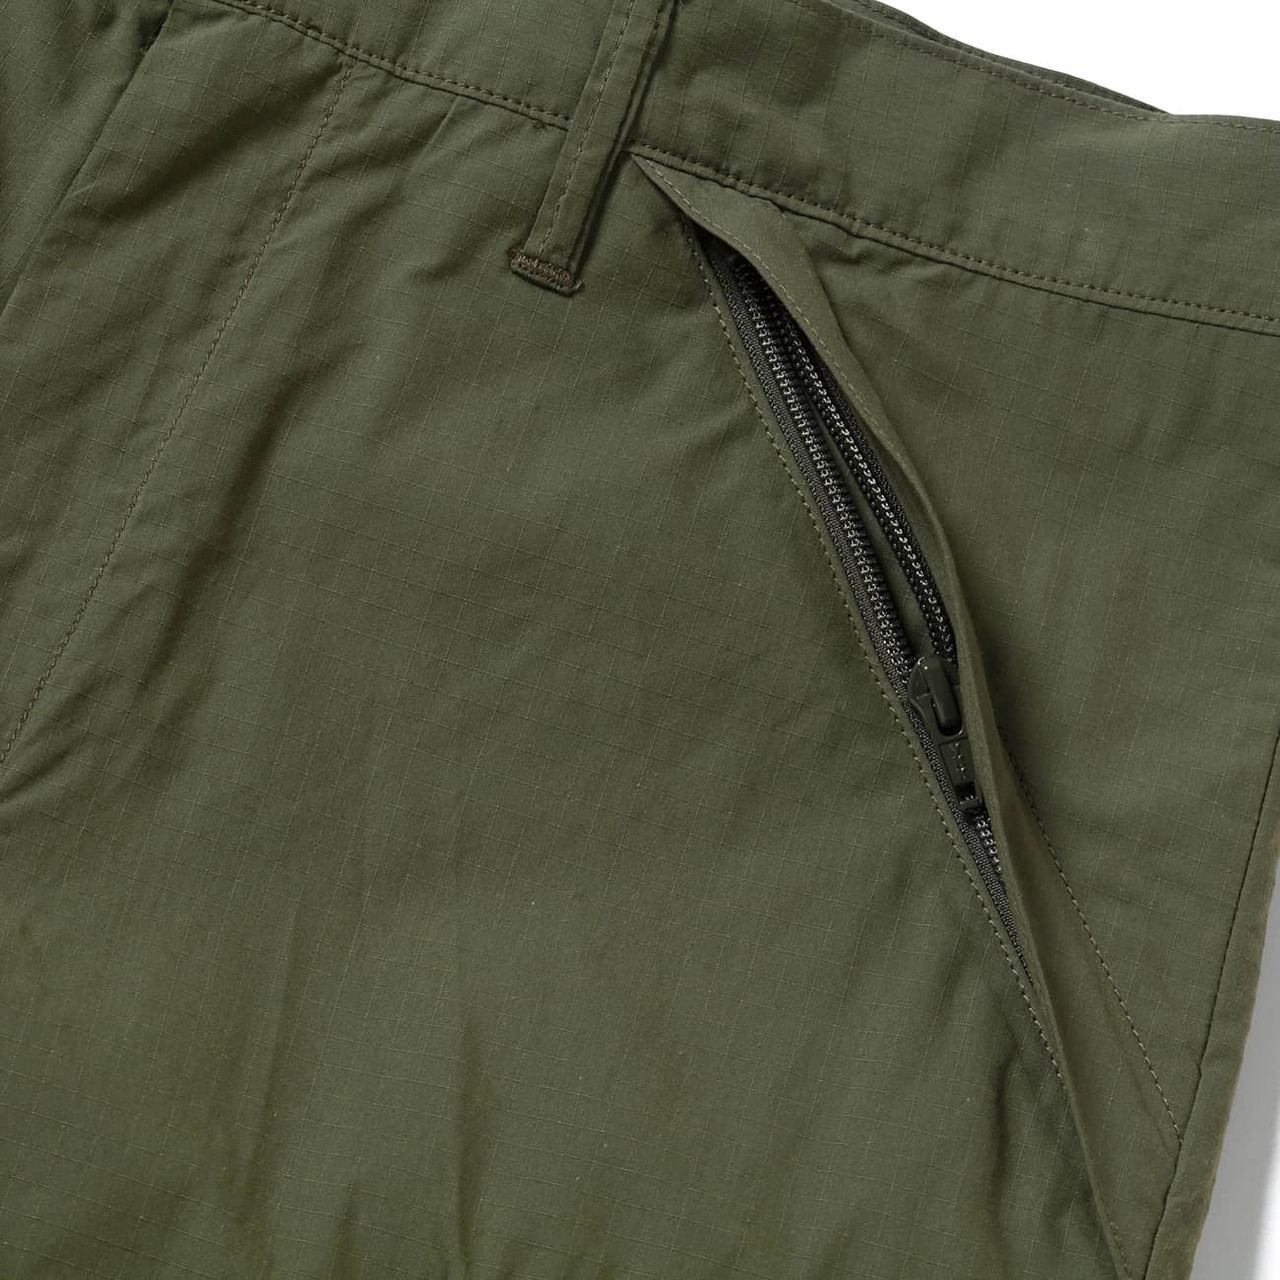 WTAPS Trousers BGT / TROUSERS / NYCO. RIPSTOP. CORDURA®